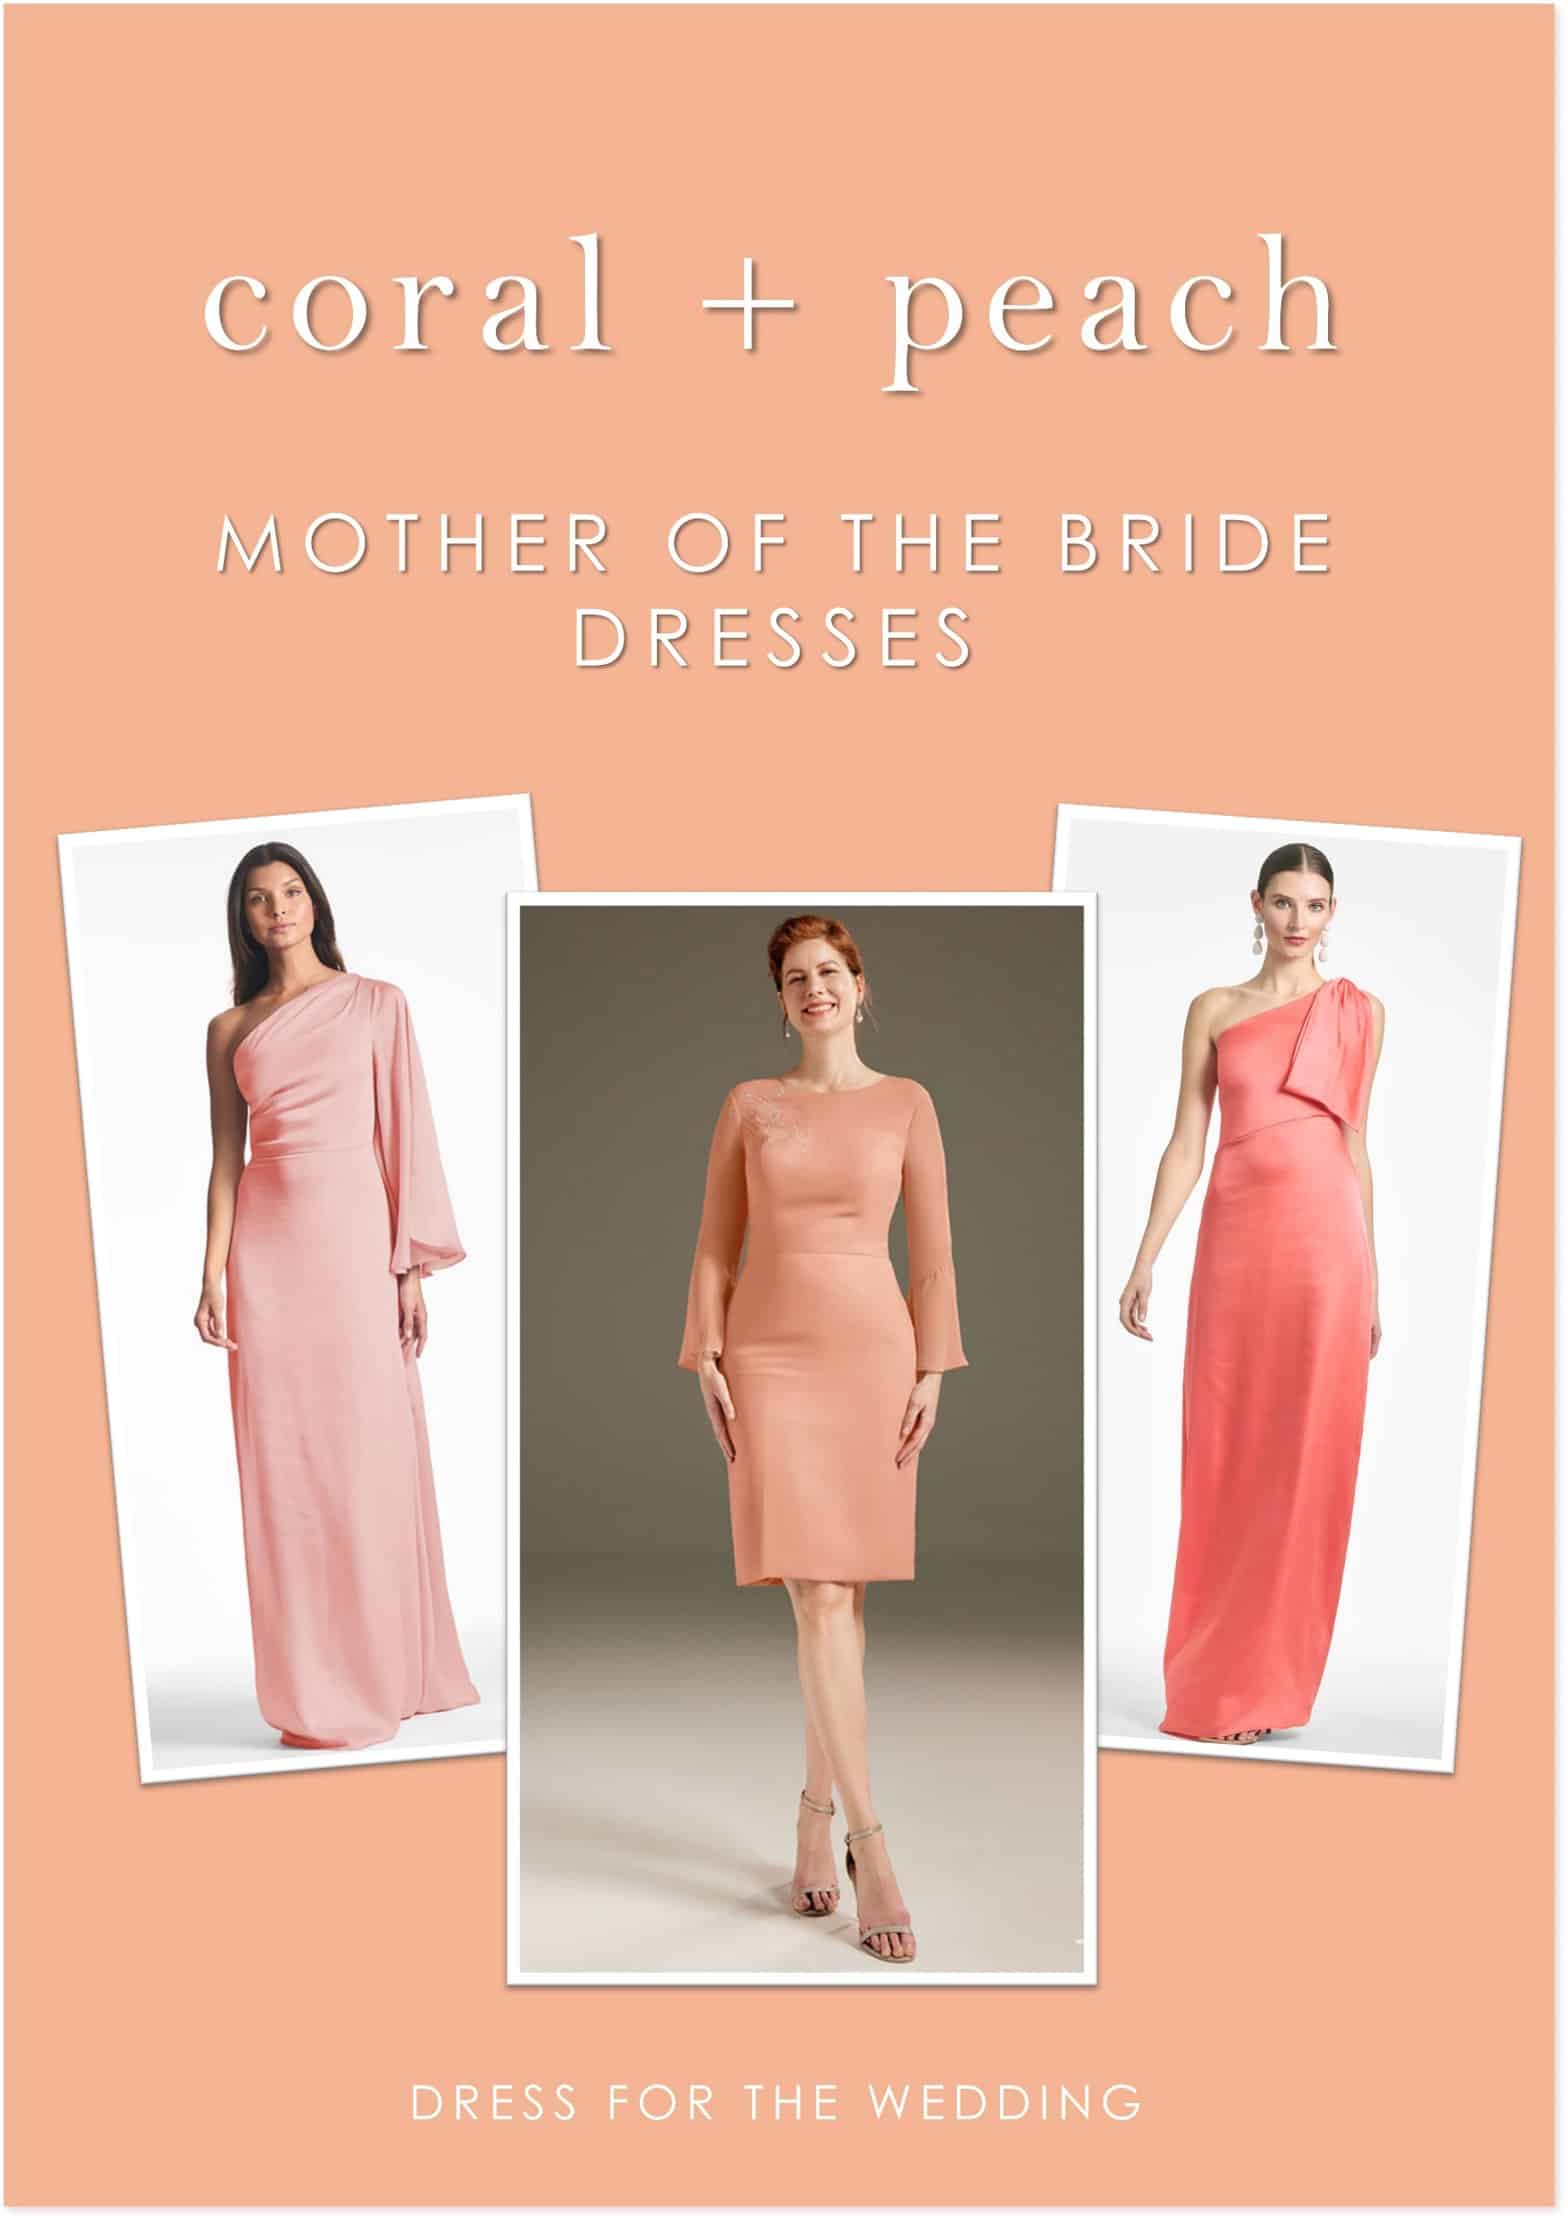 Coral, Peach, or Orange Mother of the Bride Dresses - Dress for the Wedding